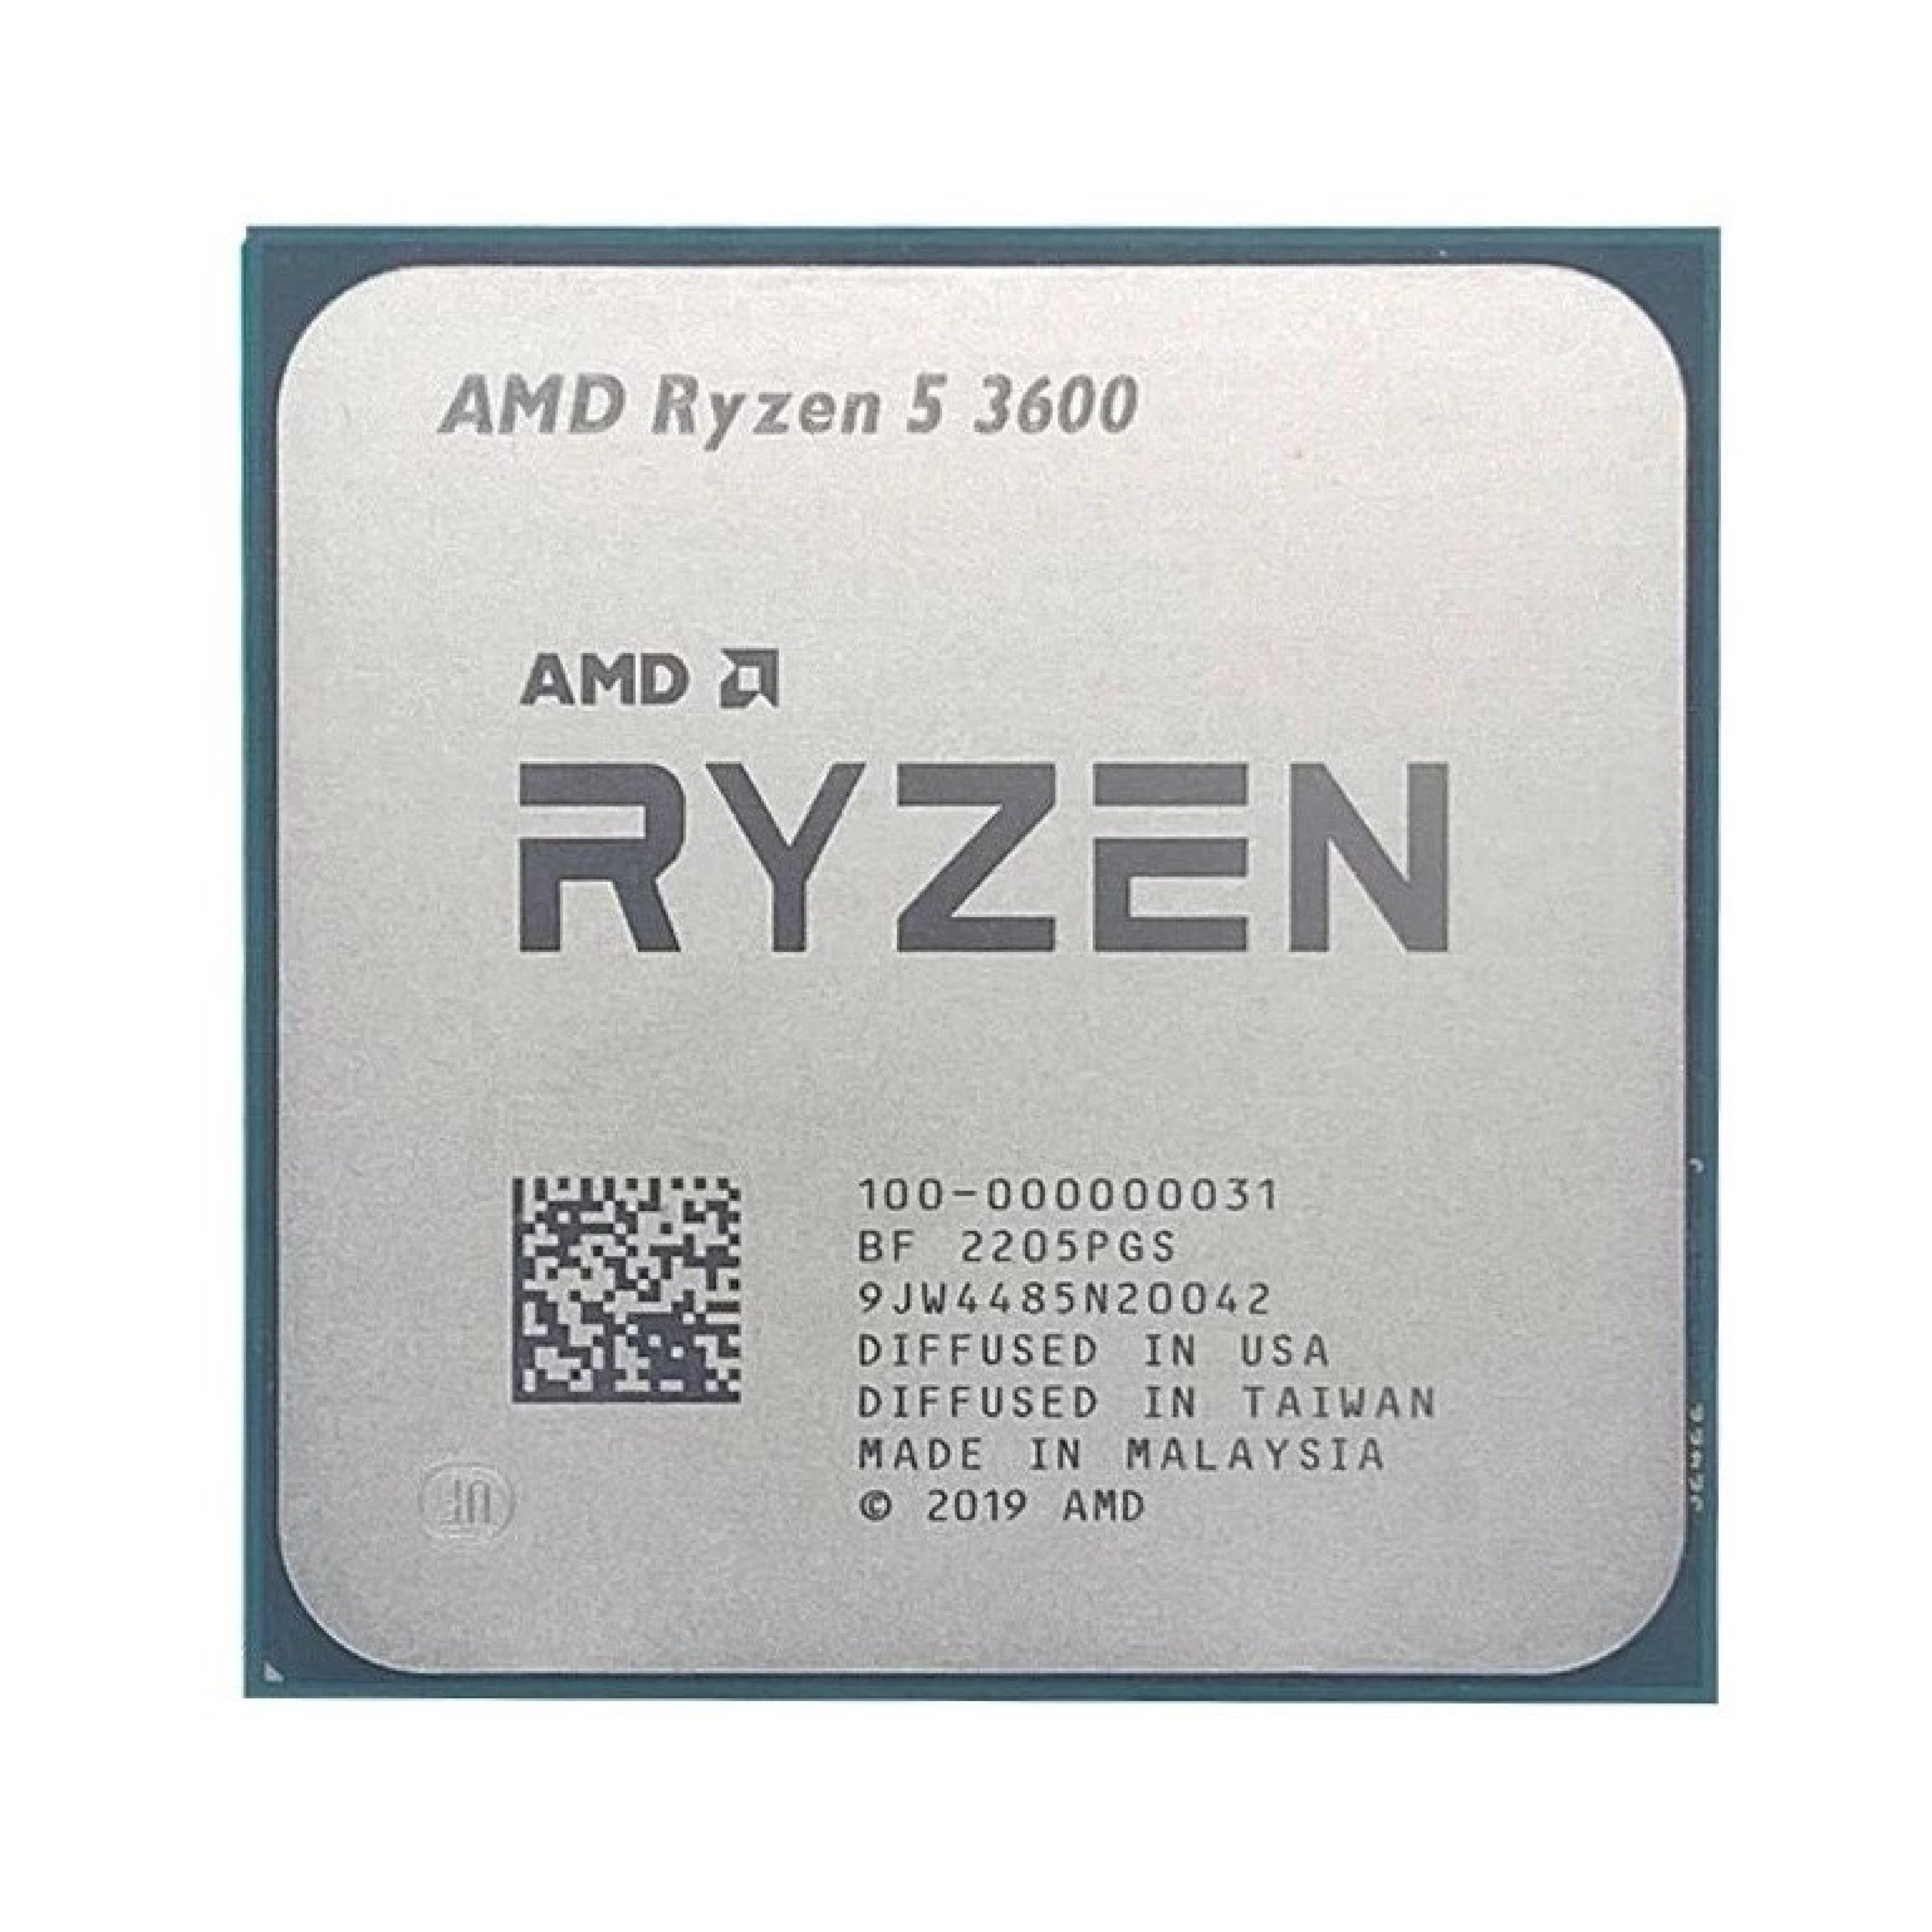 Buy your AMD Ryzen 5 3600 processor for €74.99 – Radiance Systems